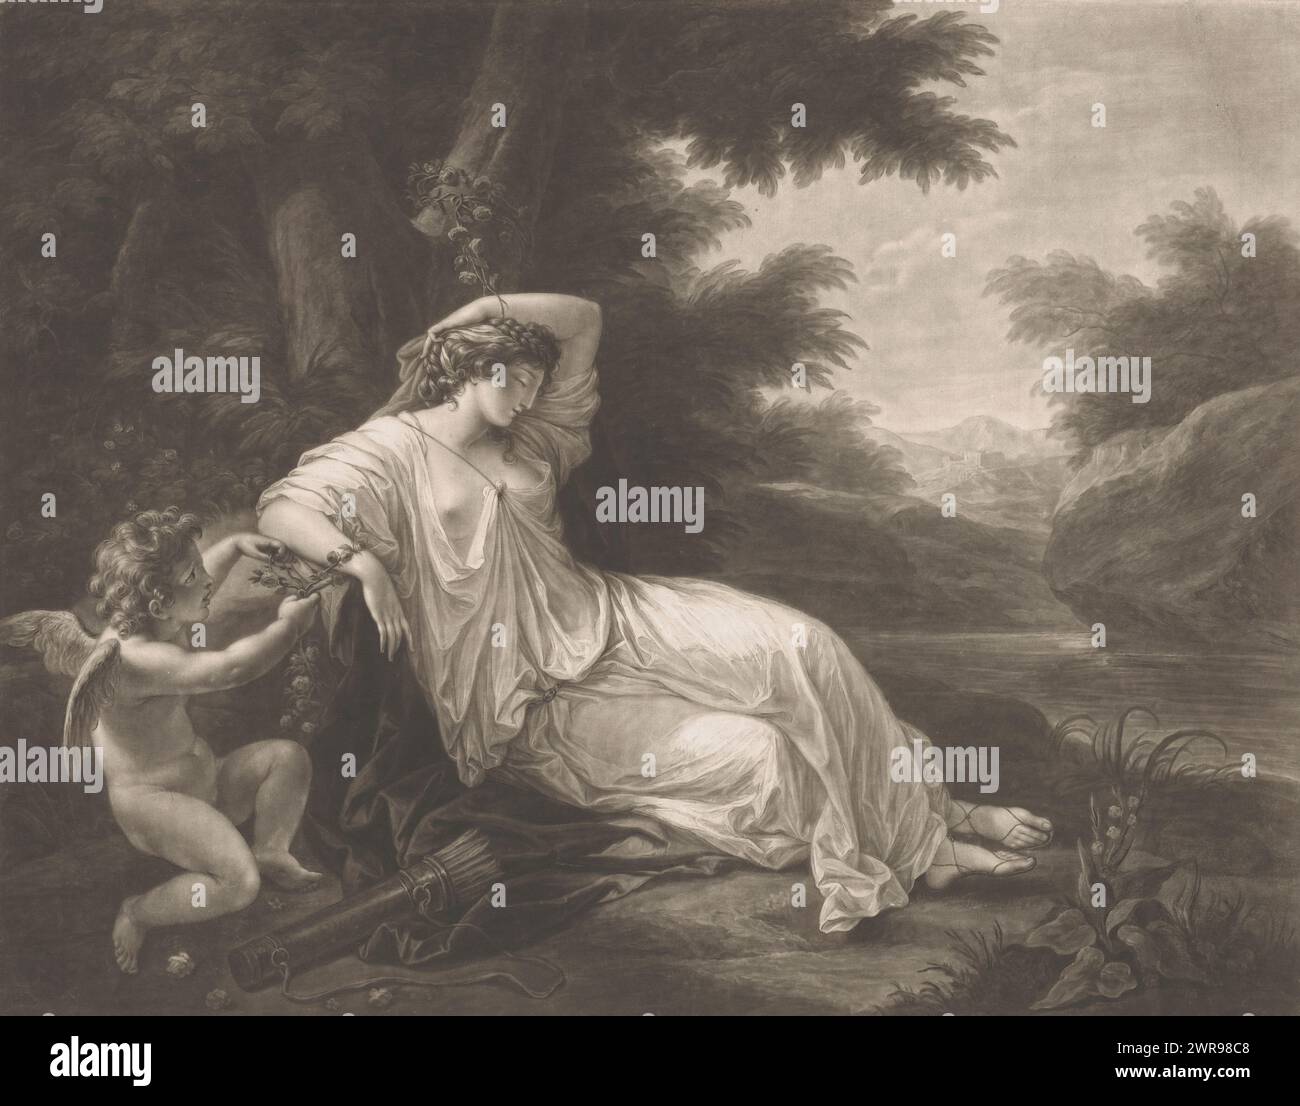 Cupid ties the sleeping Aglaia to a tree, print maker: Thomas Burke, after painting by: Angelica Kauffmann, publisher: William Wynne Ryland, London, Jul-1774, paper, etching, height 443 mm × width 532 mm, print Stock Photo